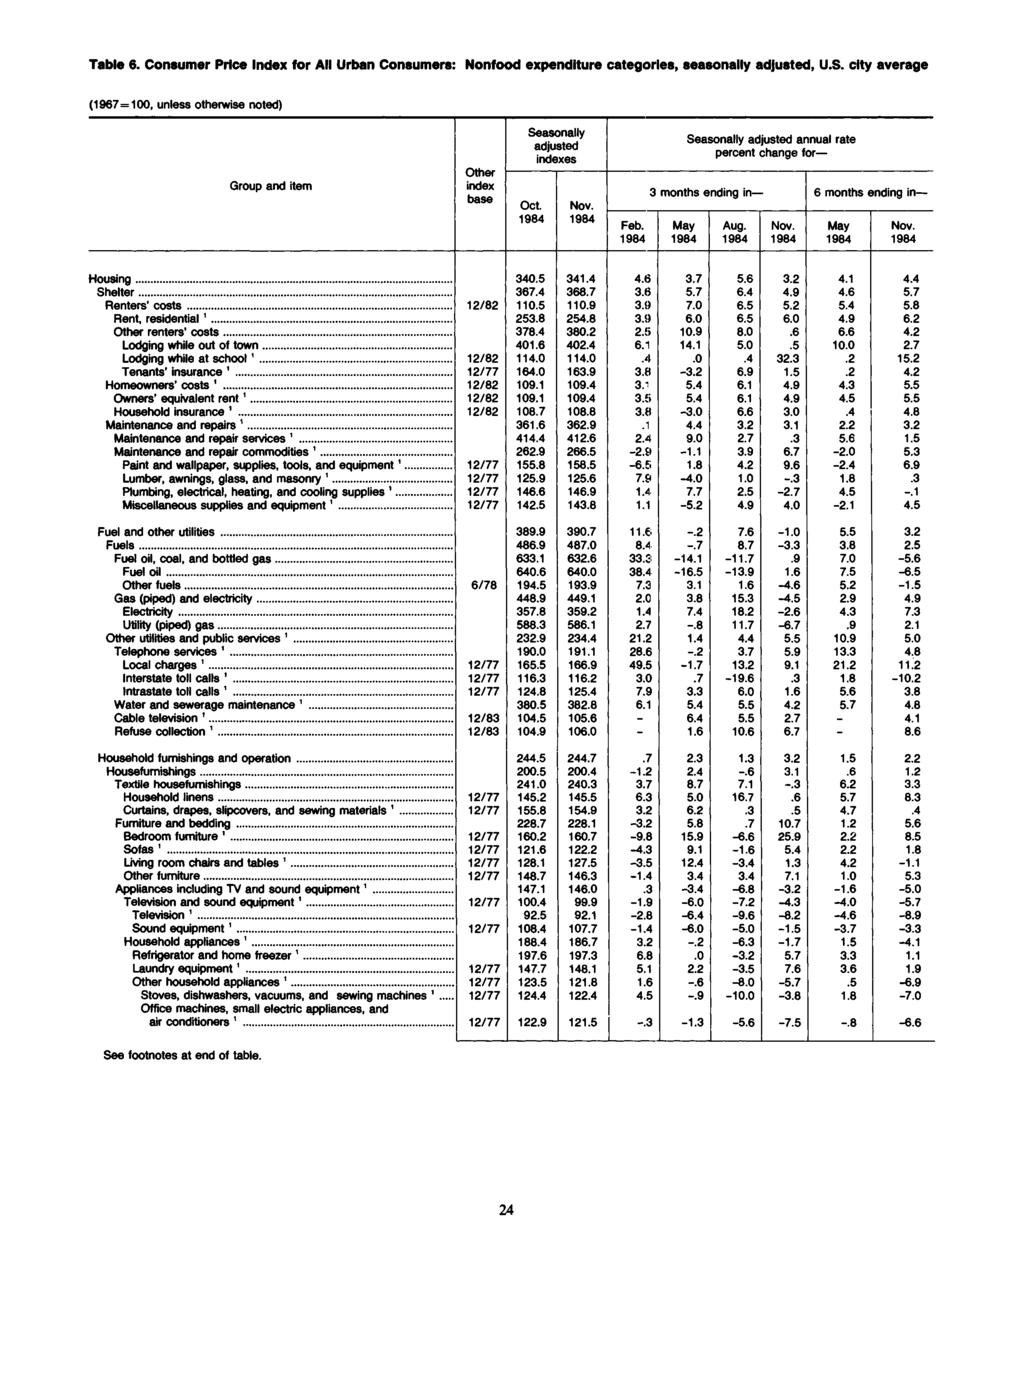 Table 6. Consumer Price for All Urban Consumers: Nonfood expenditure categories, seasonally adjusted, U.S.